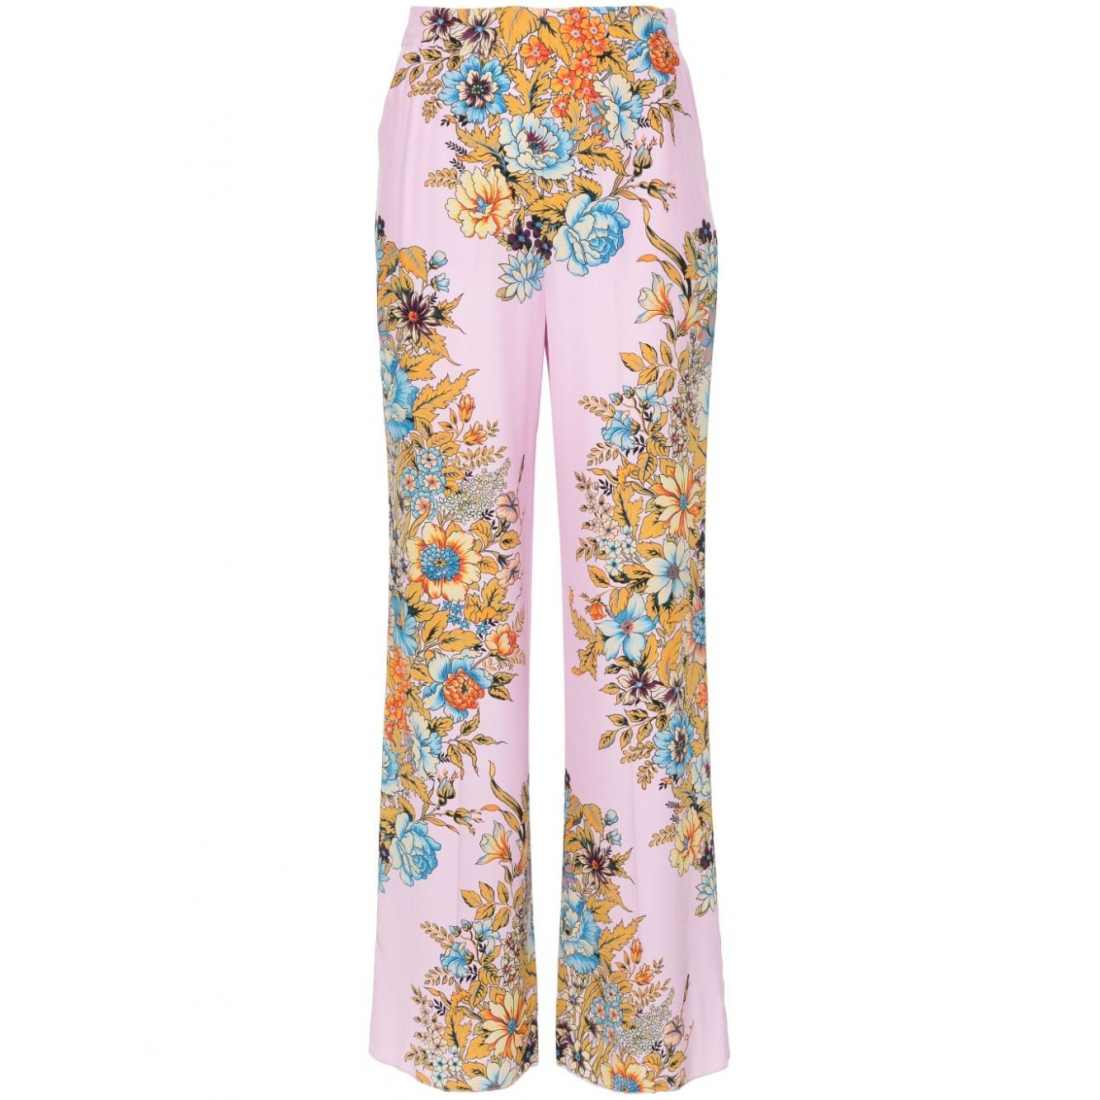 Women's 'Floral-Print' Trousers